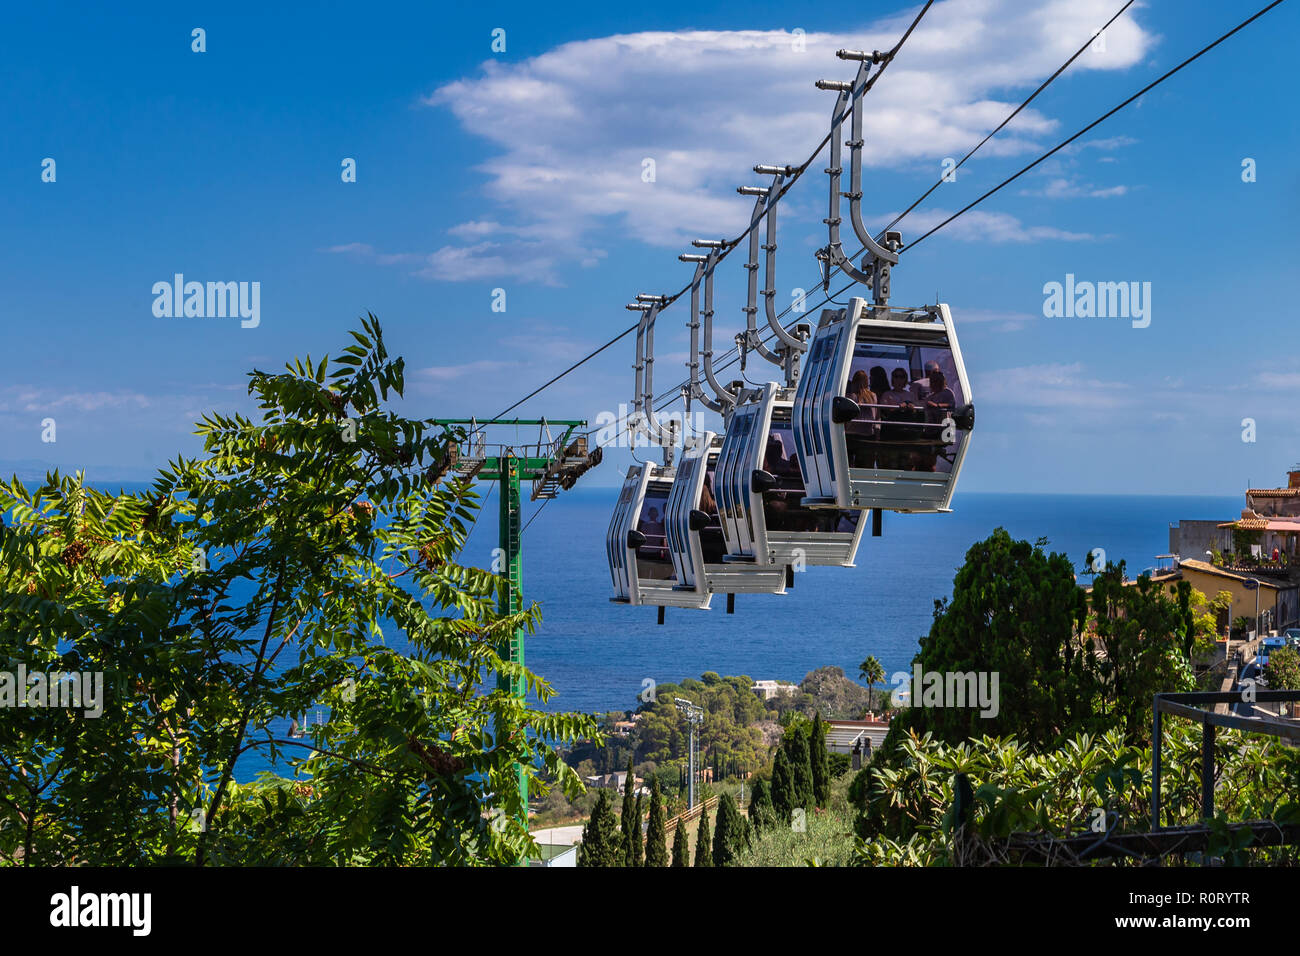 Taormina, Italy - September 26, 2018: Beautiful Sicilian landscape with cable cars 'funivia' that connect the historic center of Taormina with its bea Stock Photo